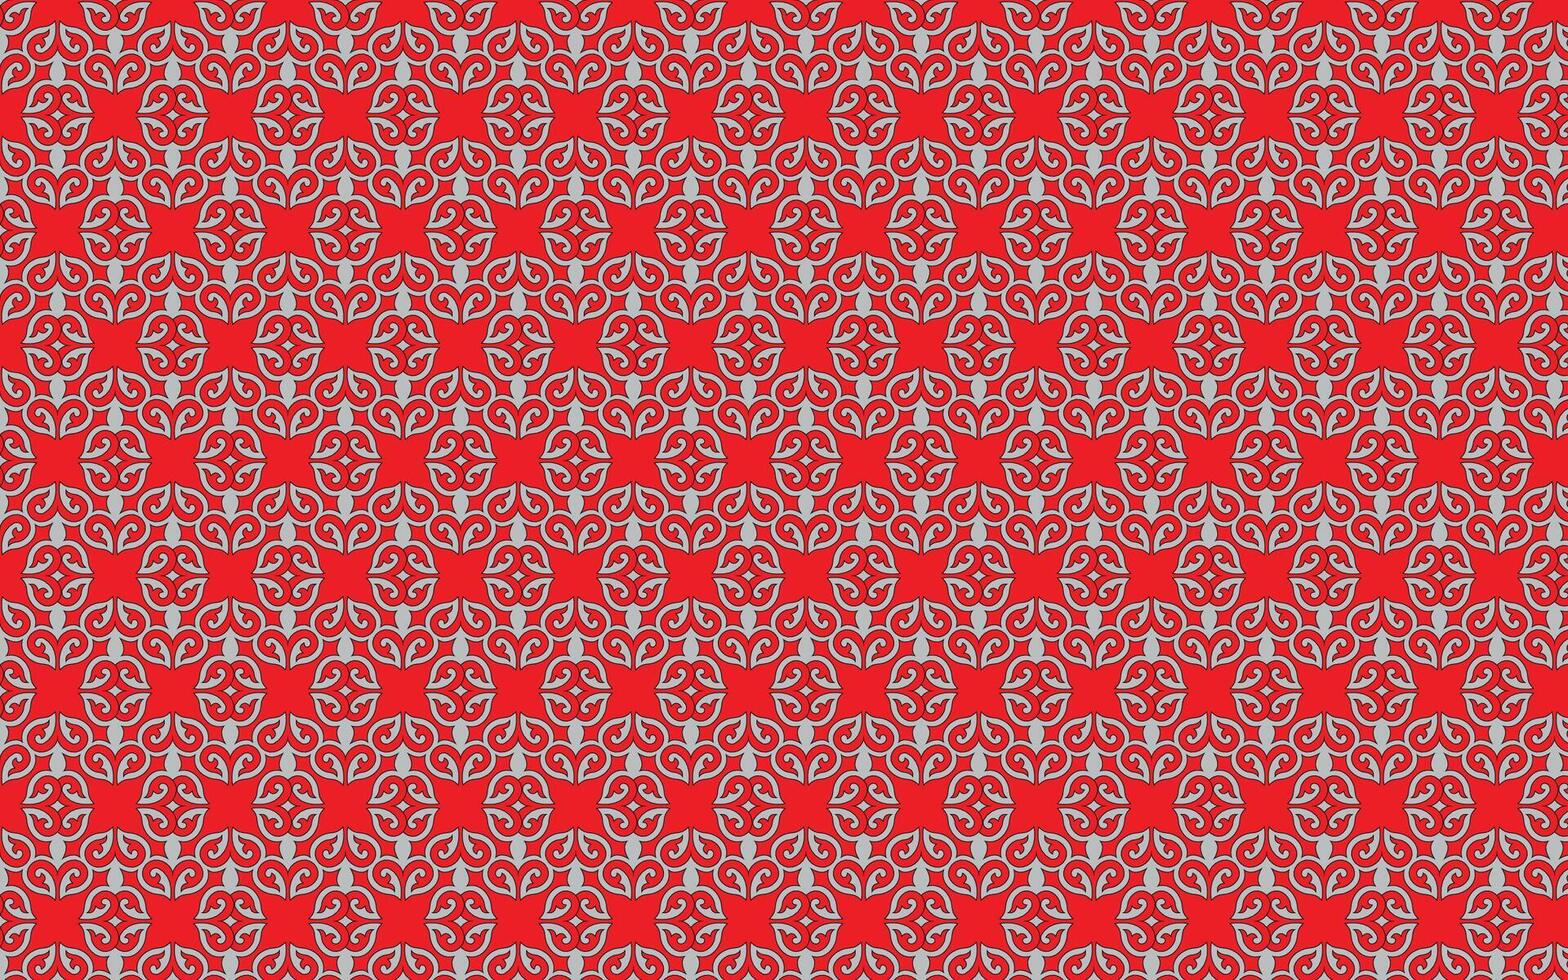 Background Red and White seamless pattern decorative vintage floral design vector